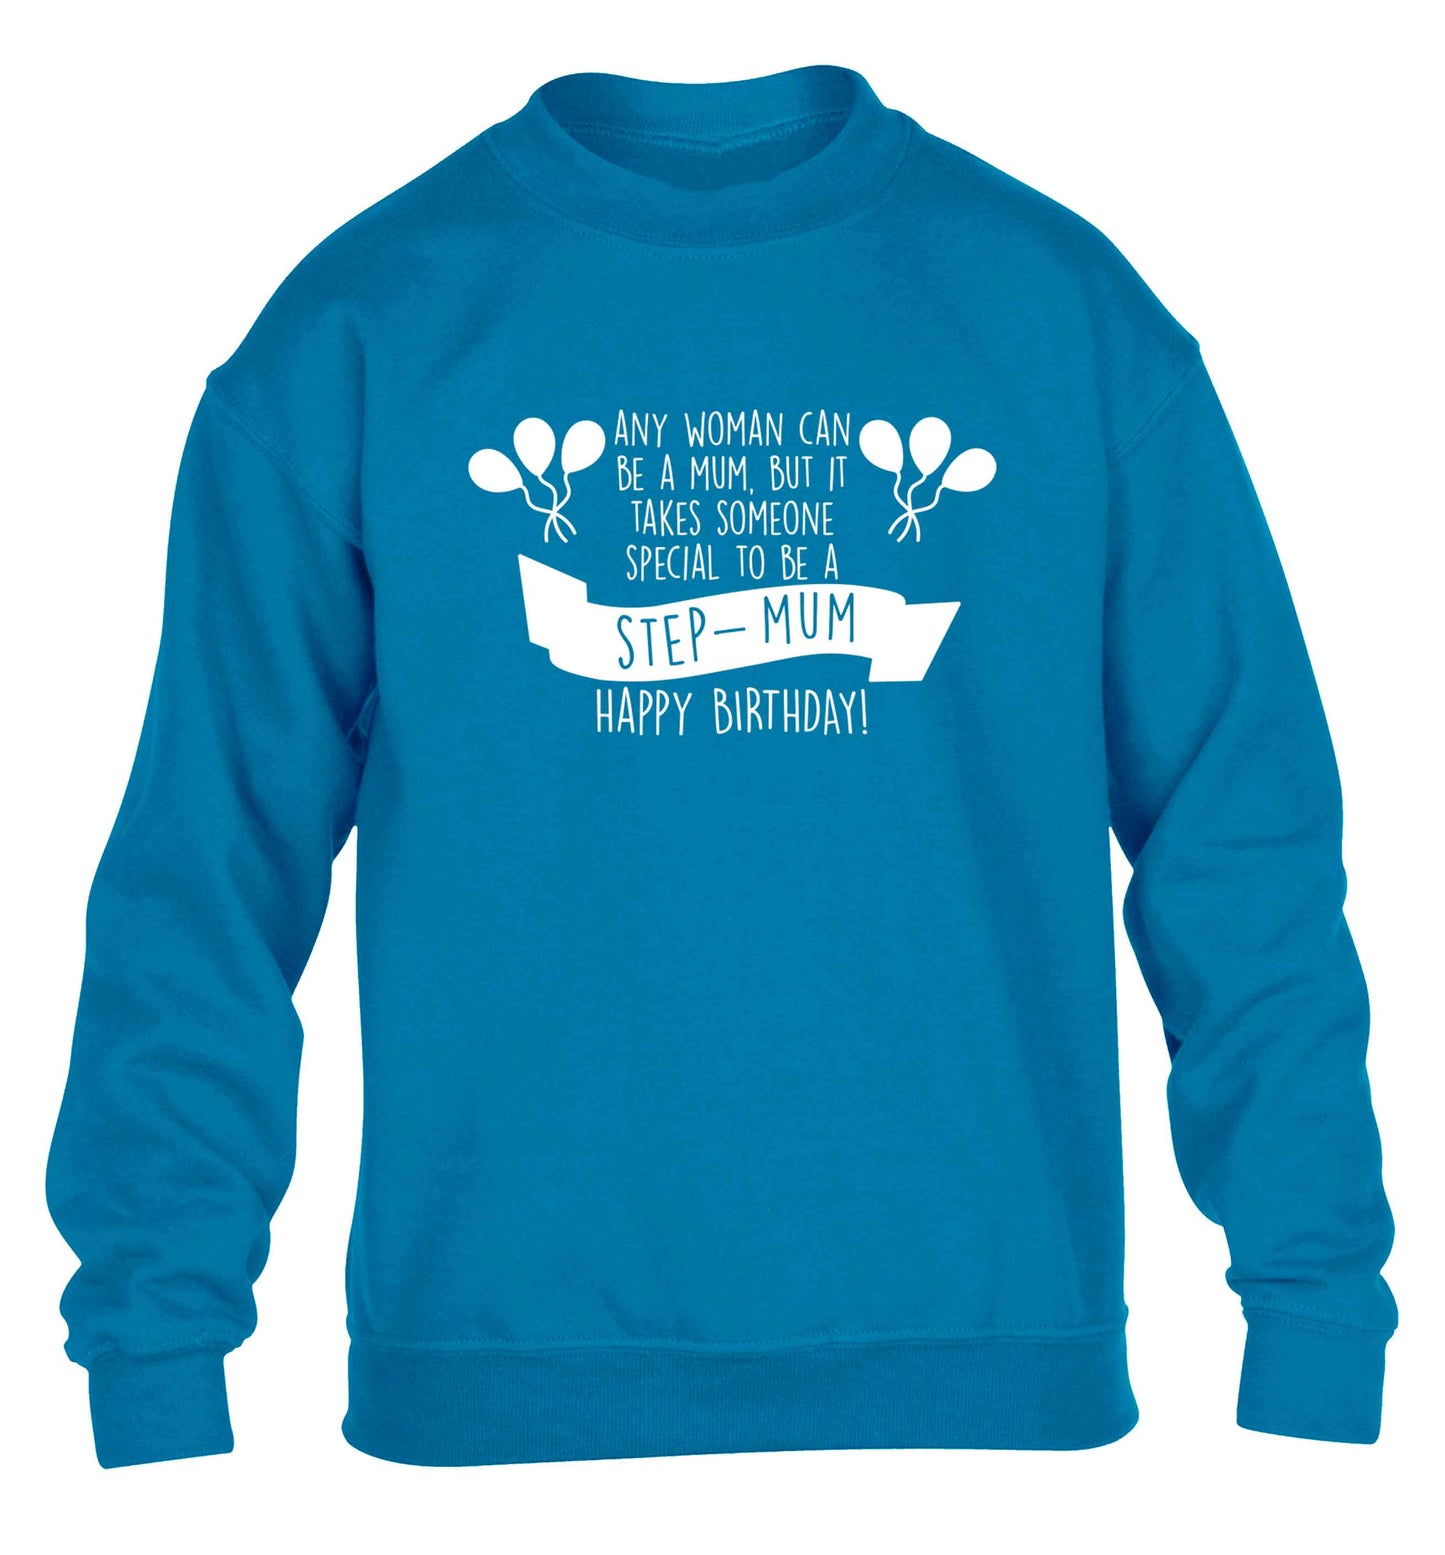 Takes someone special to be a step-mum, happy birthday! children's blue sweater 12-13 Years